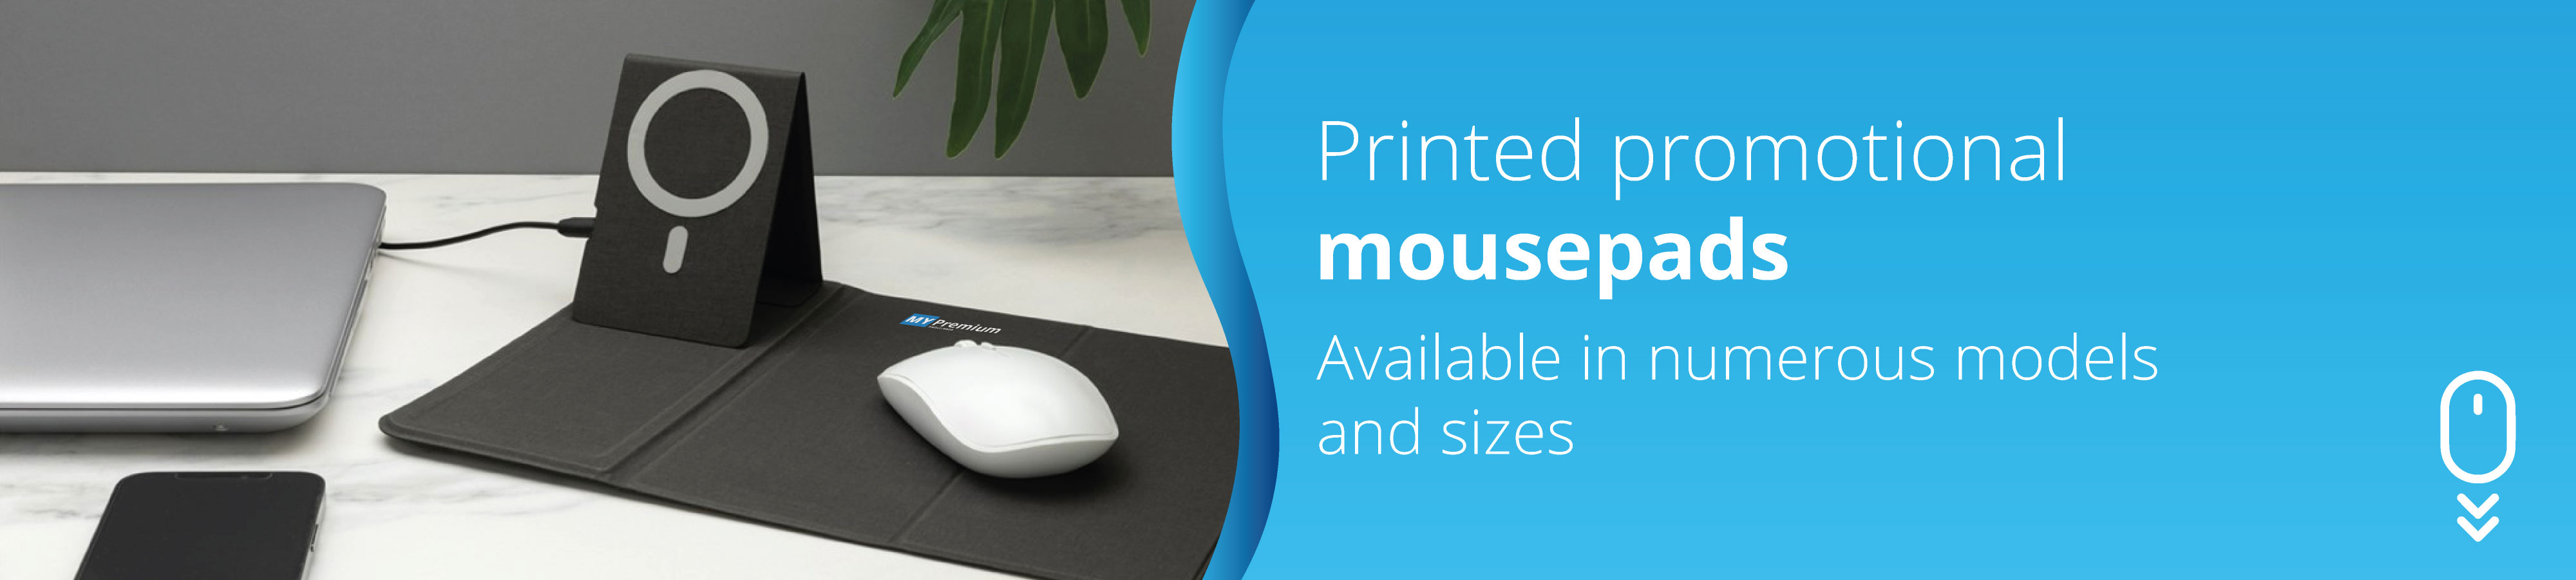 printed-promotional-mousepads